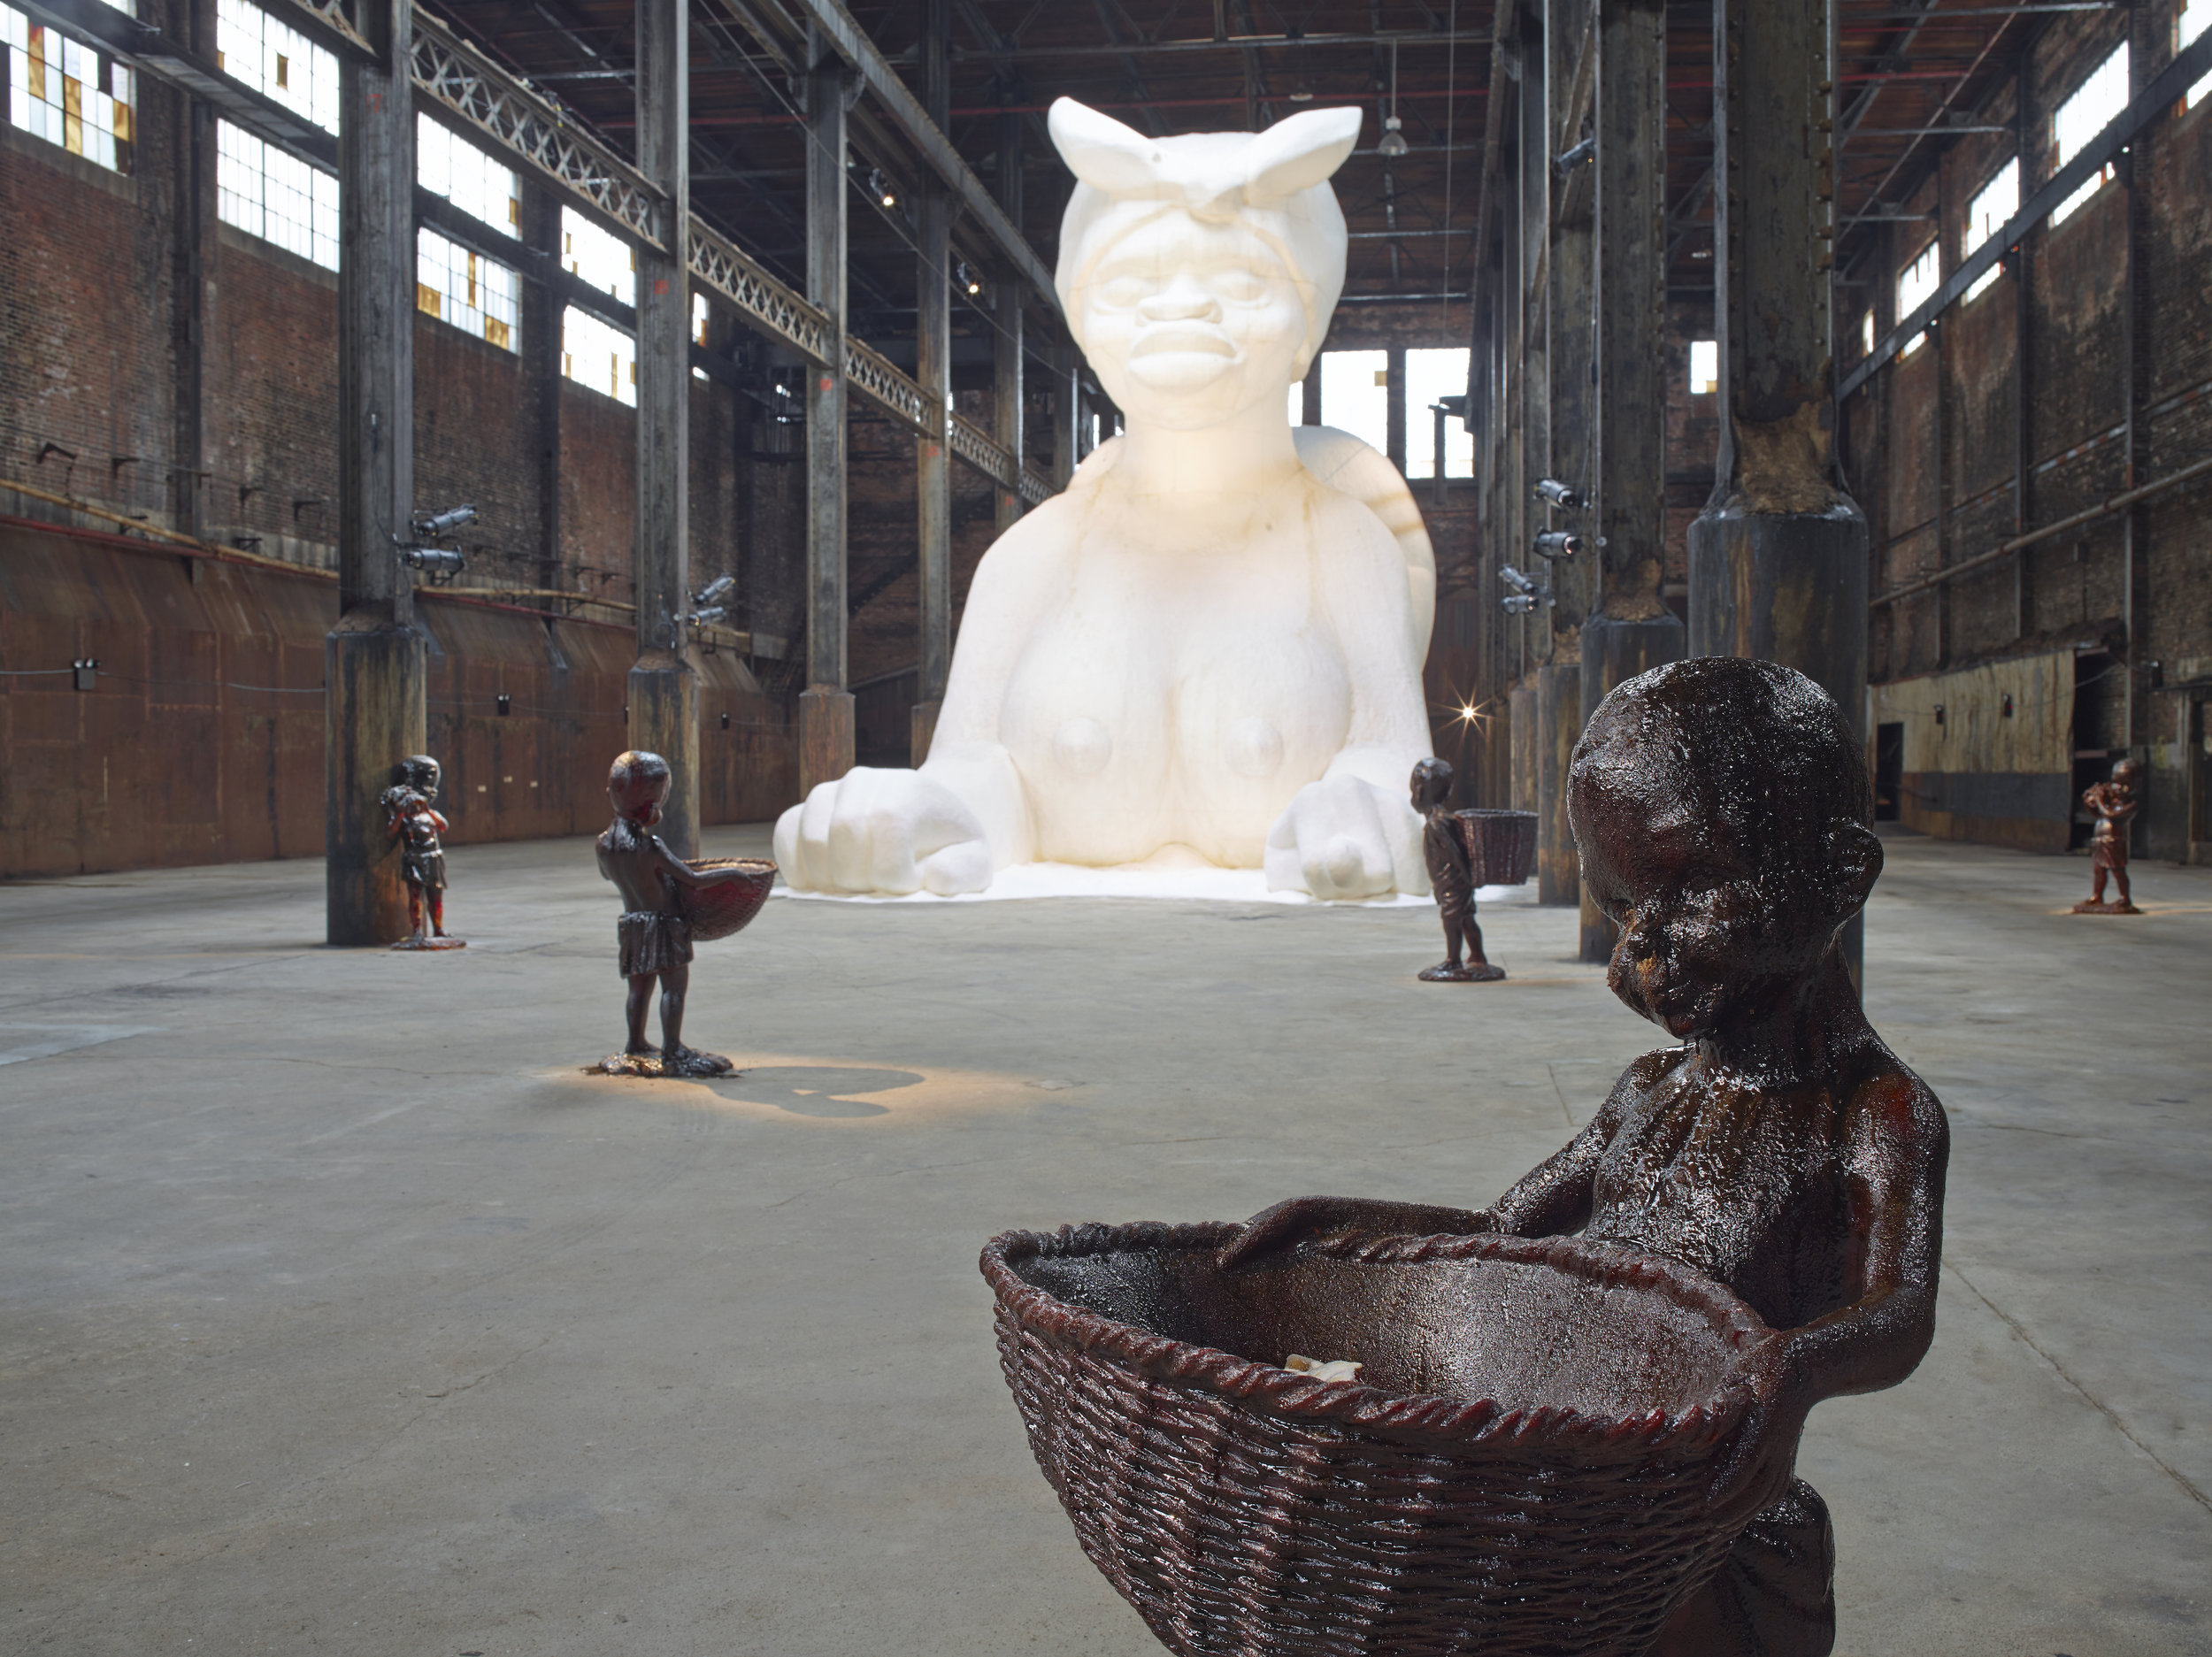  Kara Walker,  At the behest of Creative Time Kara E. Walker has confected: A Subtlety, or the Marvelous Sugar Baby, an Homage to the unpaid and overworked Artisans who have refined our Sweet tastes from the cane fields to the Kitchens of the New Wor